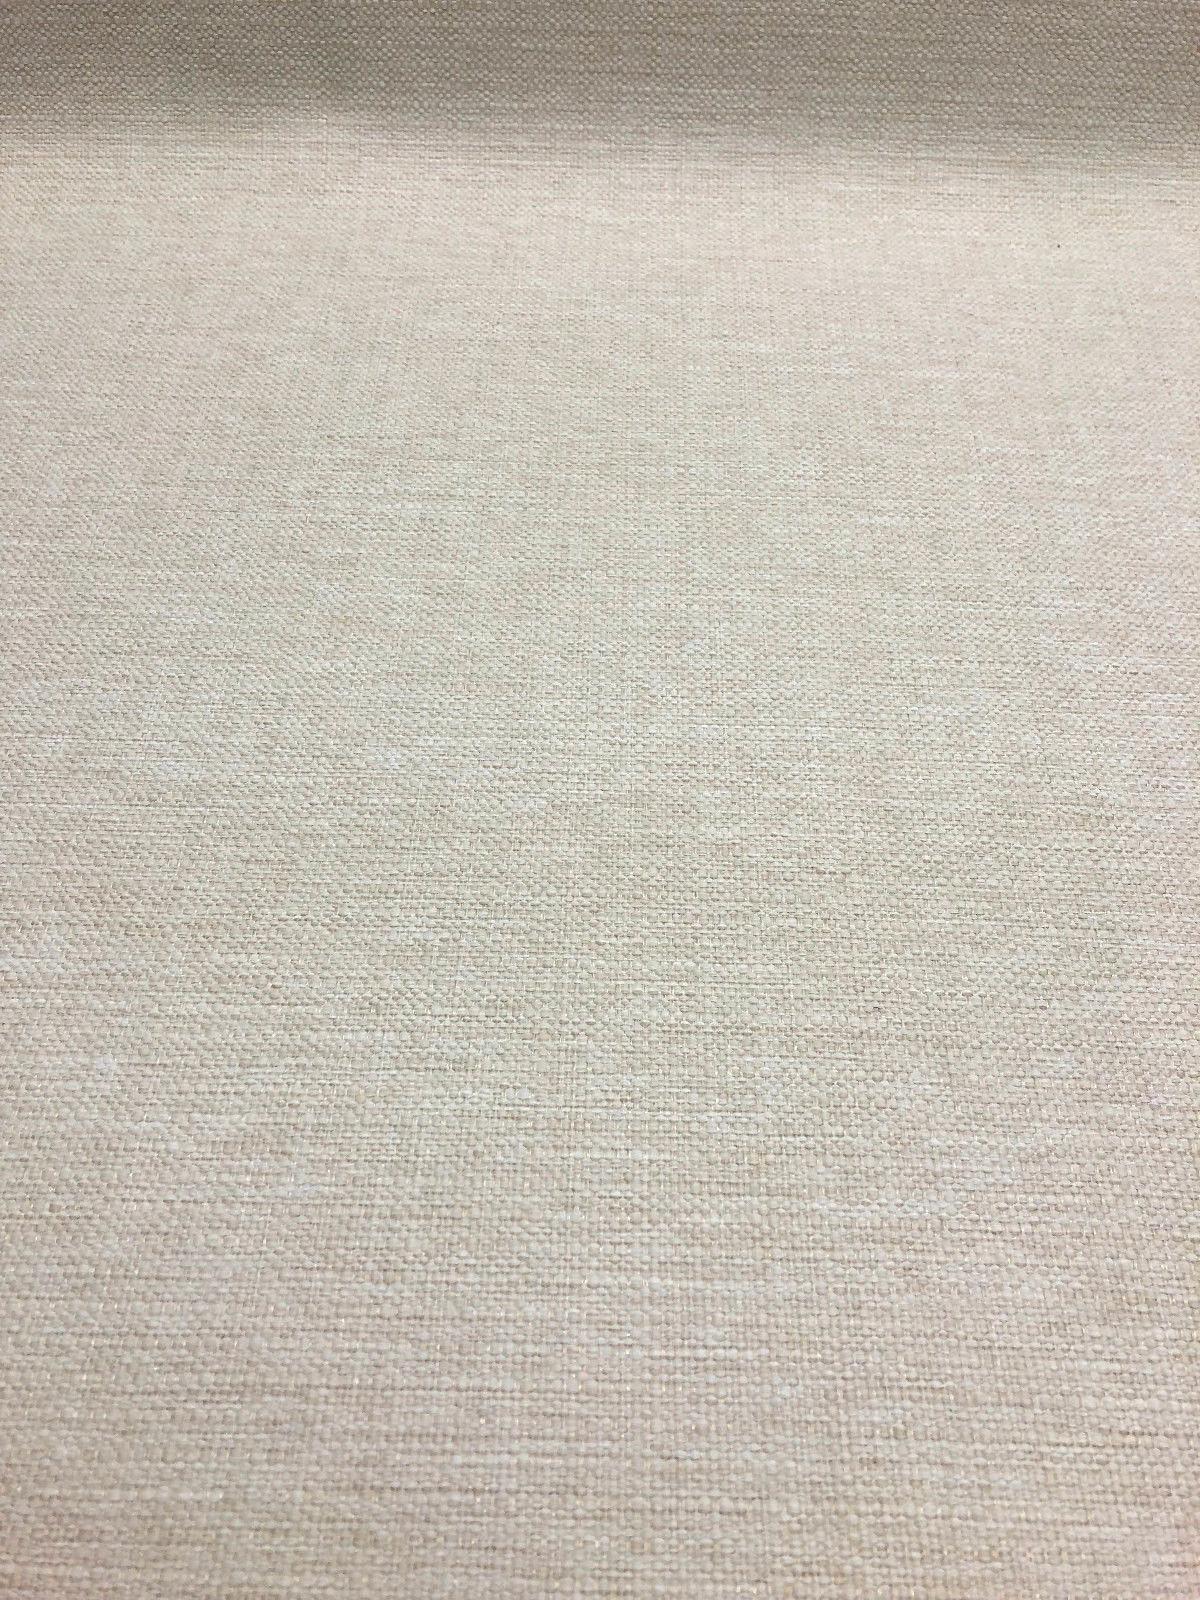 Chenille Fabric in Off White, Heavyweight Upholstery, 54 Wide, By the  Yard